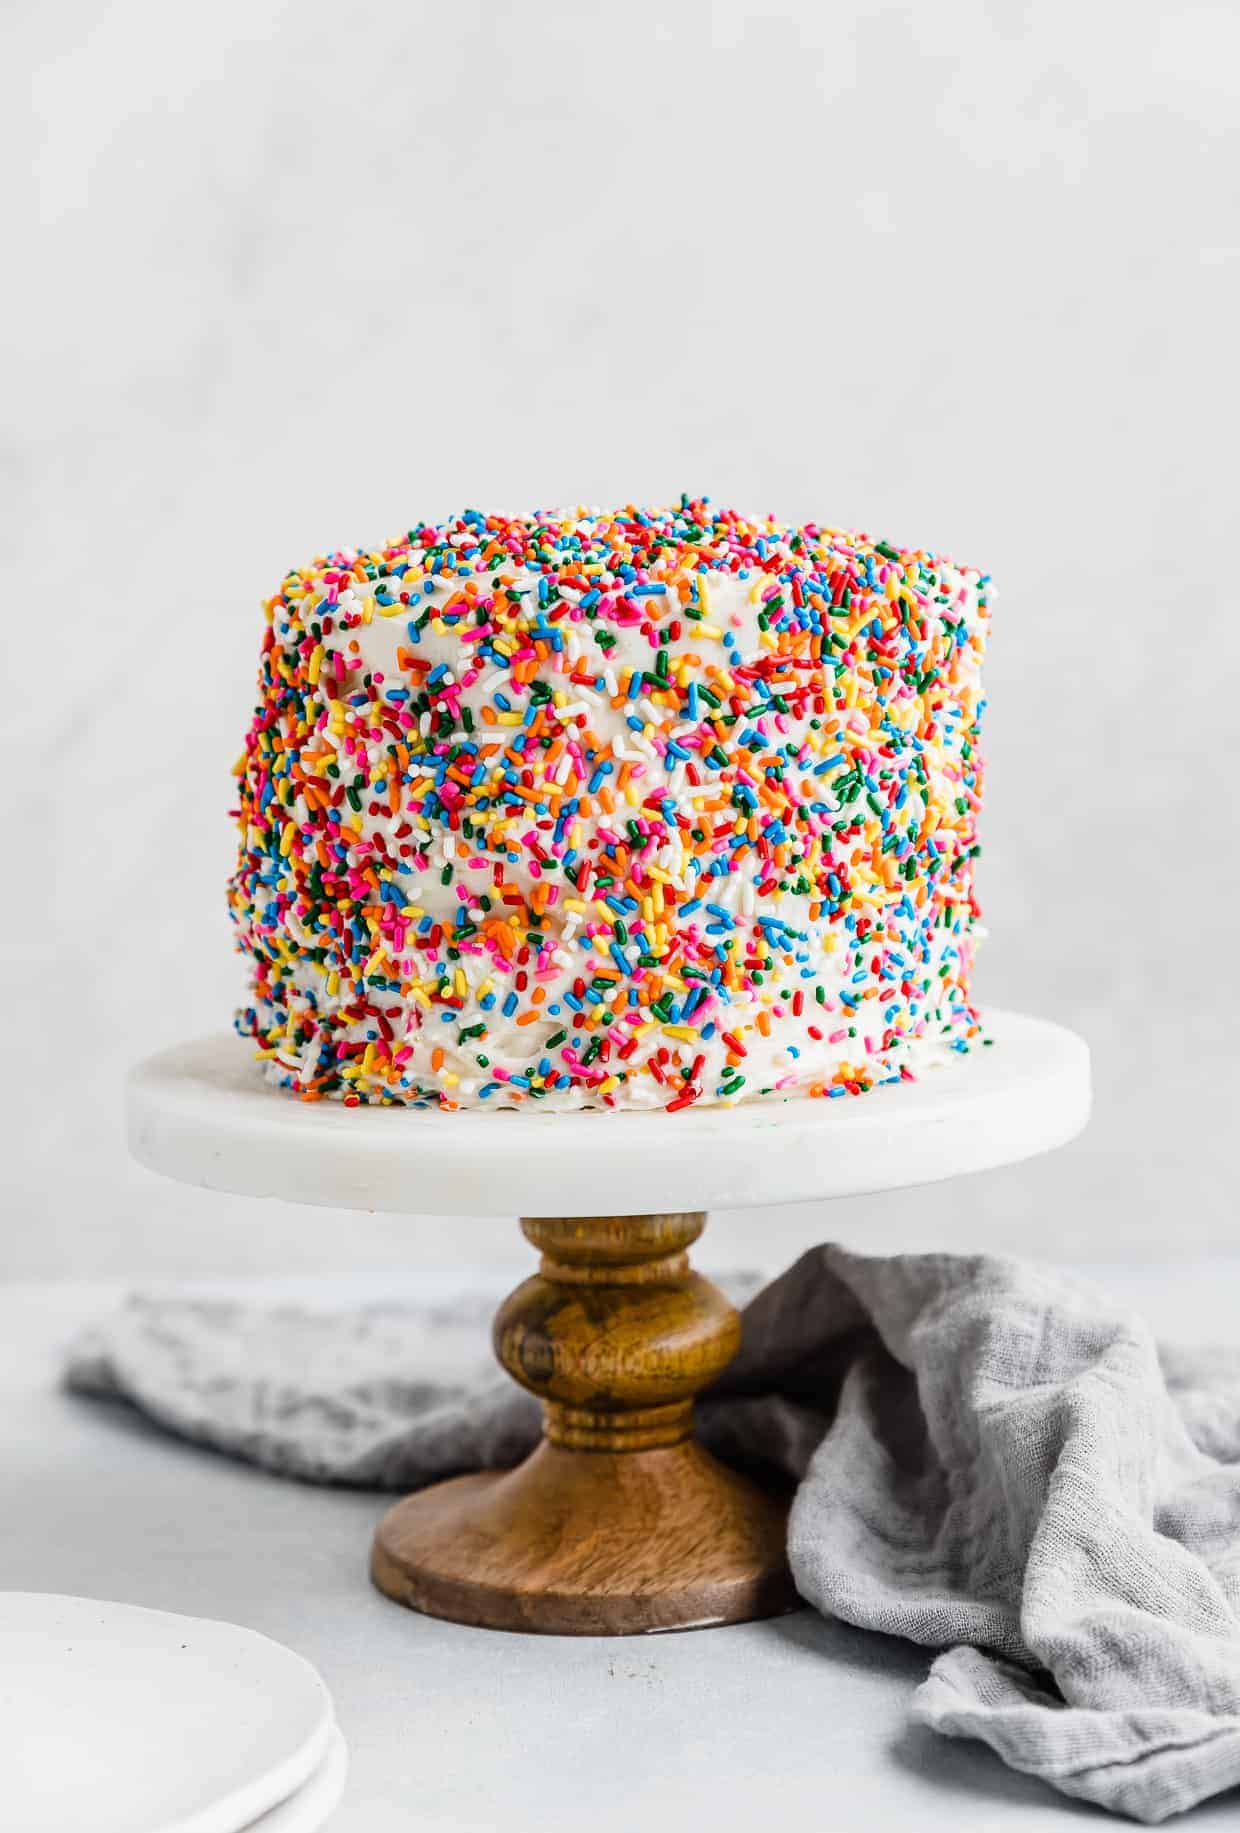 A sprinkle smash cake recipe on a cake stand against a white background.